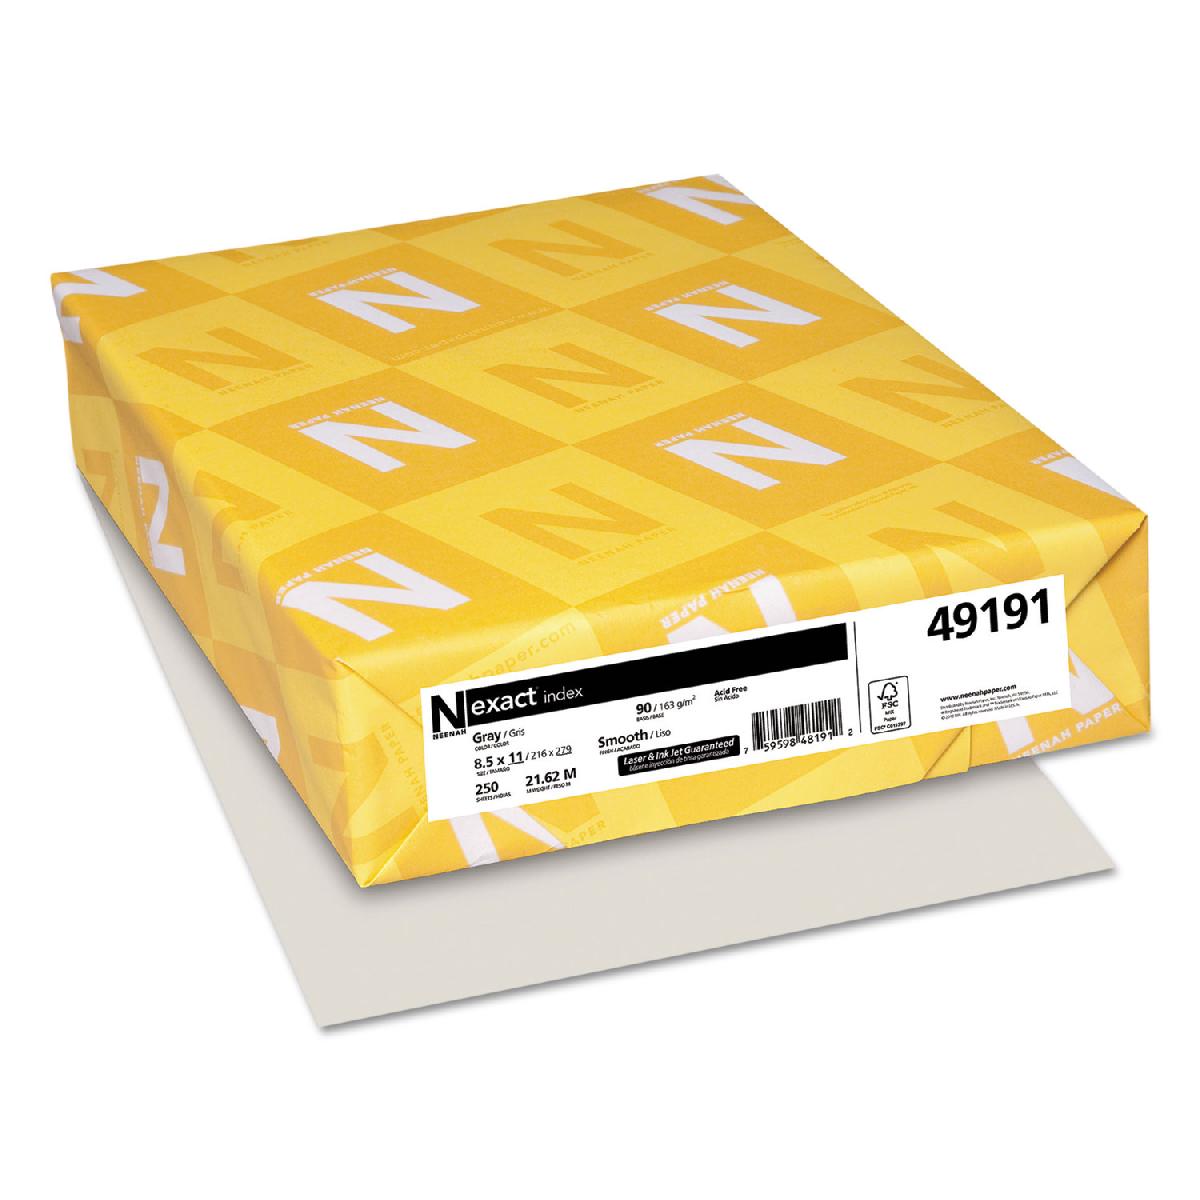 Neenah Paper® Exact Index Gray 90 lb. Smooth Card Stock 8.5x11 in. 250 Sheets per Ream